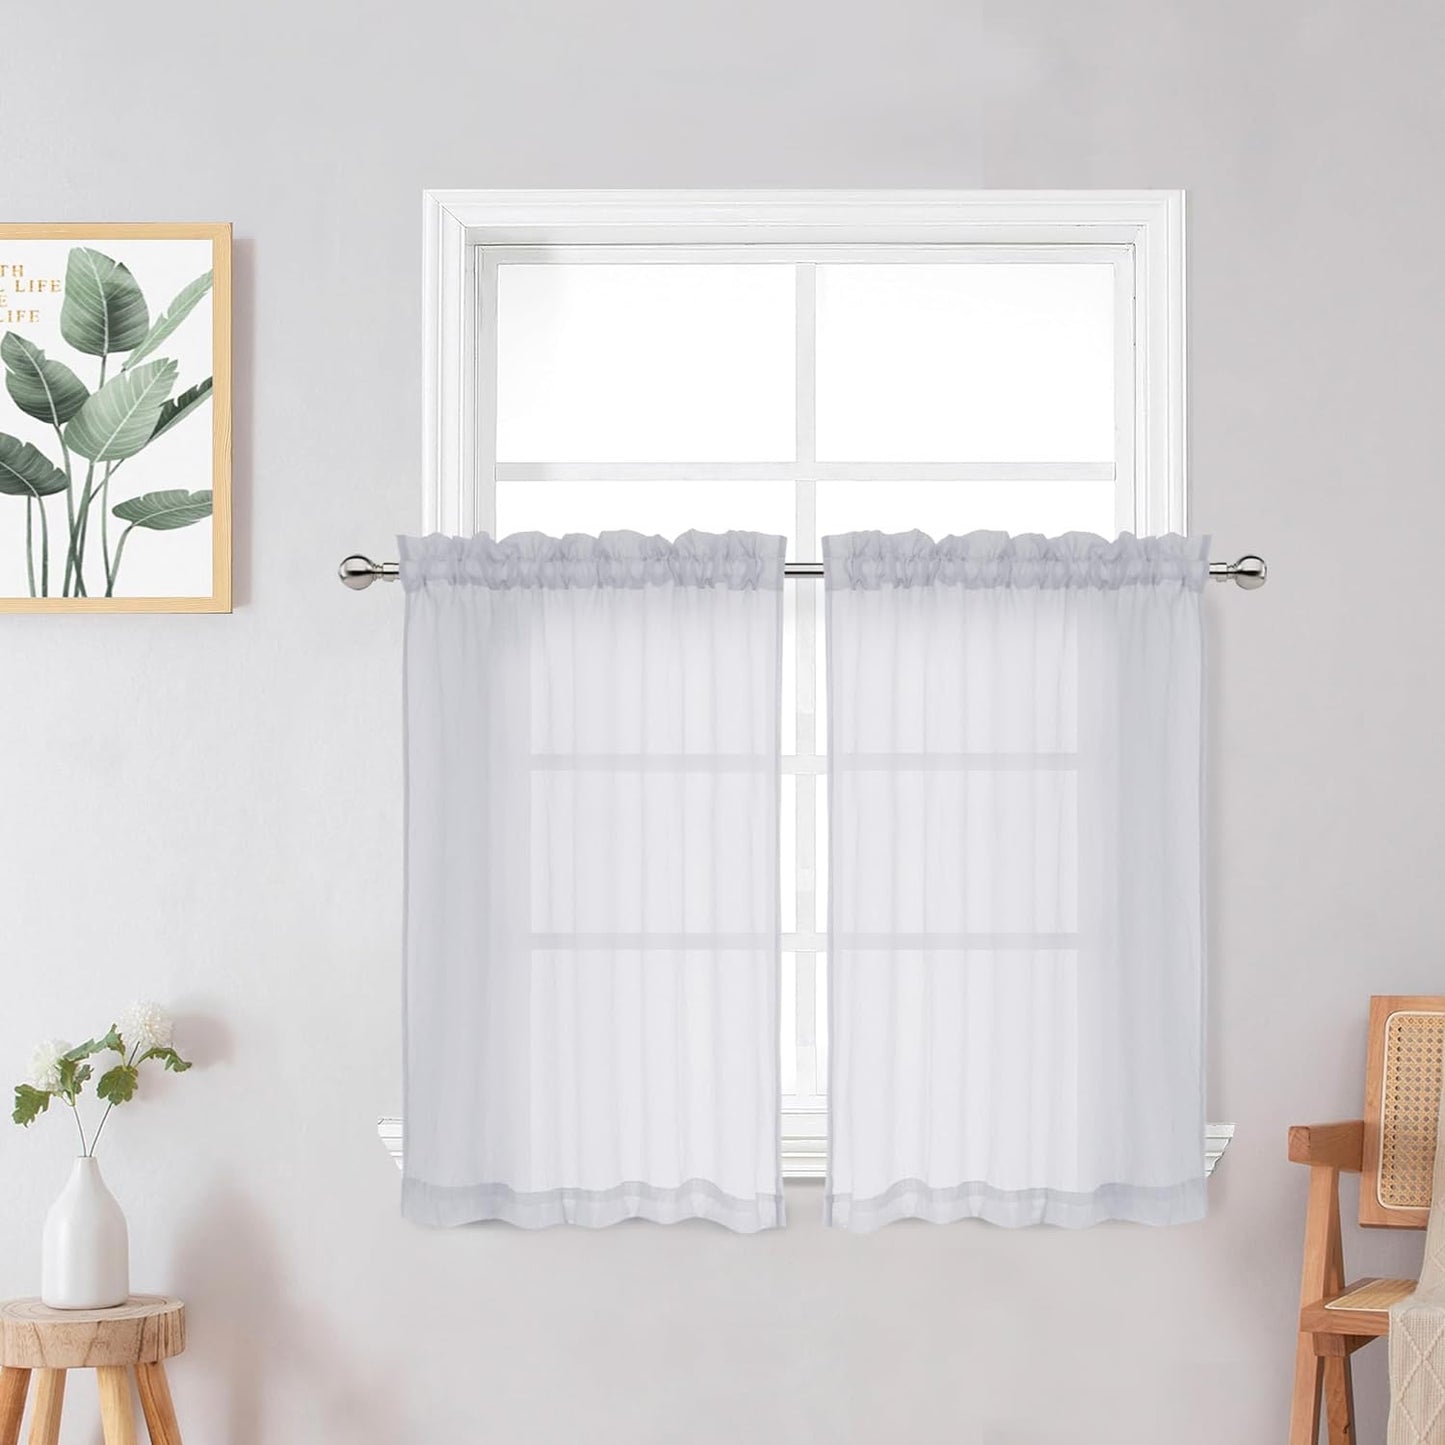 Crushed Sheer White Curtains 63 Inch Length 2 Panels, Light Filtering Solid Crinkle Voile Short Sheer Curtian for Bedroom Living Room, Each 42Wx63L Inches  Chyhomenyc Light Grey 28 W X 36 L 